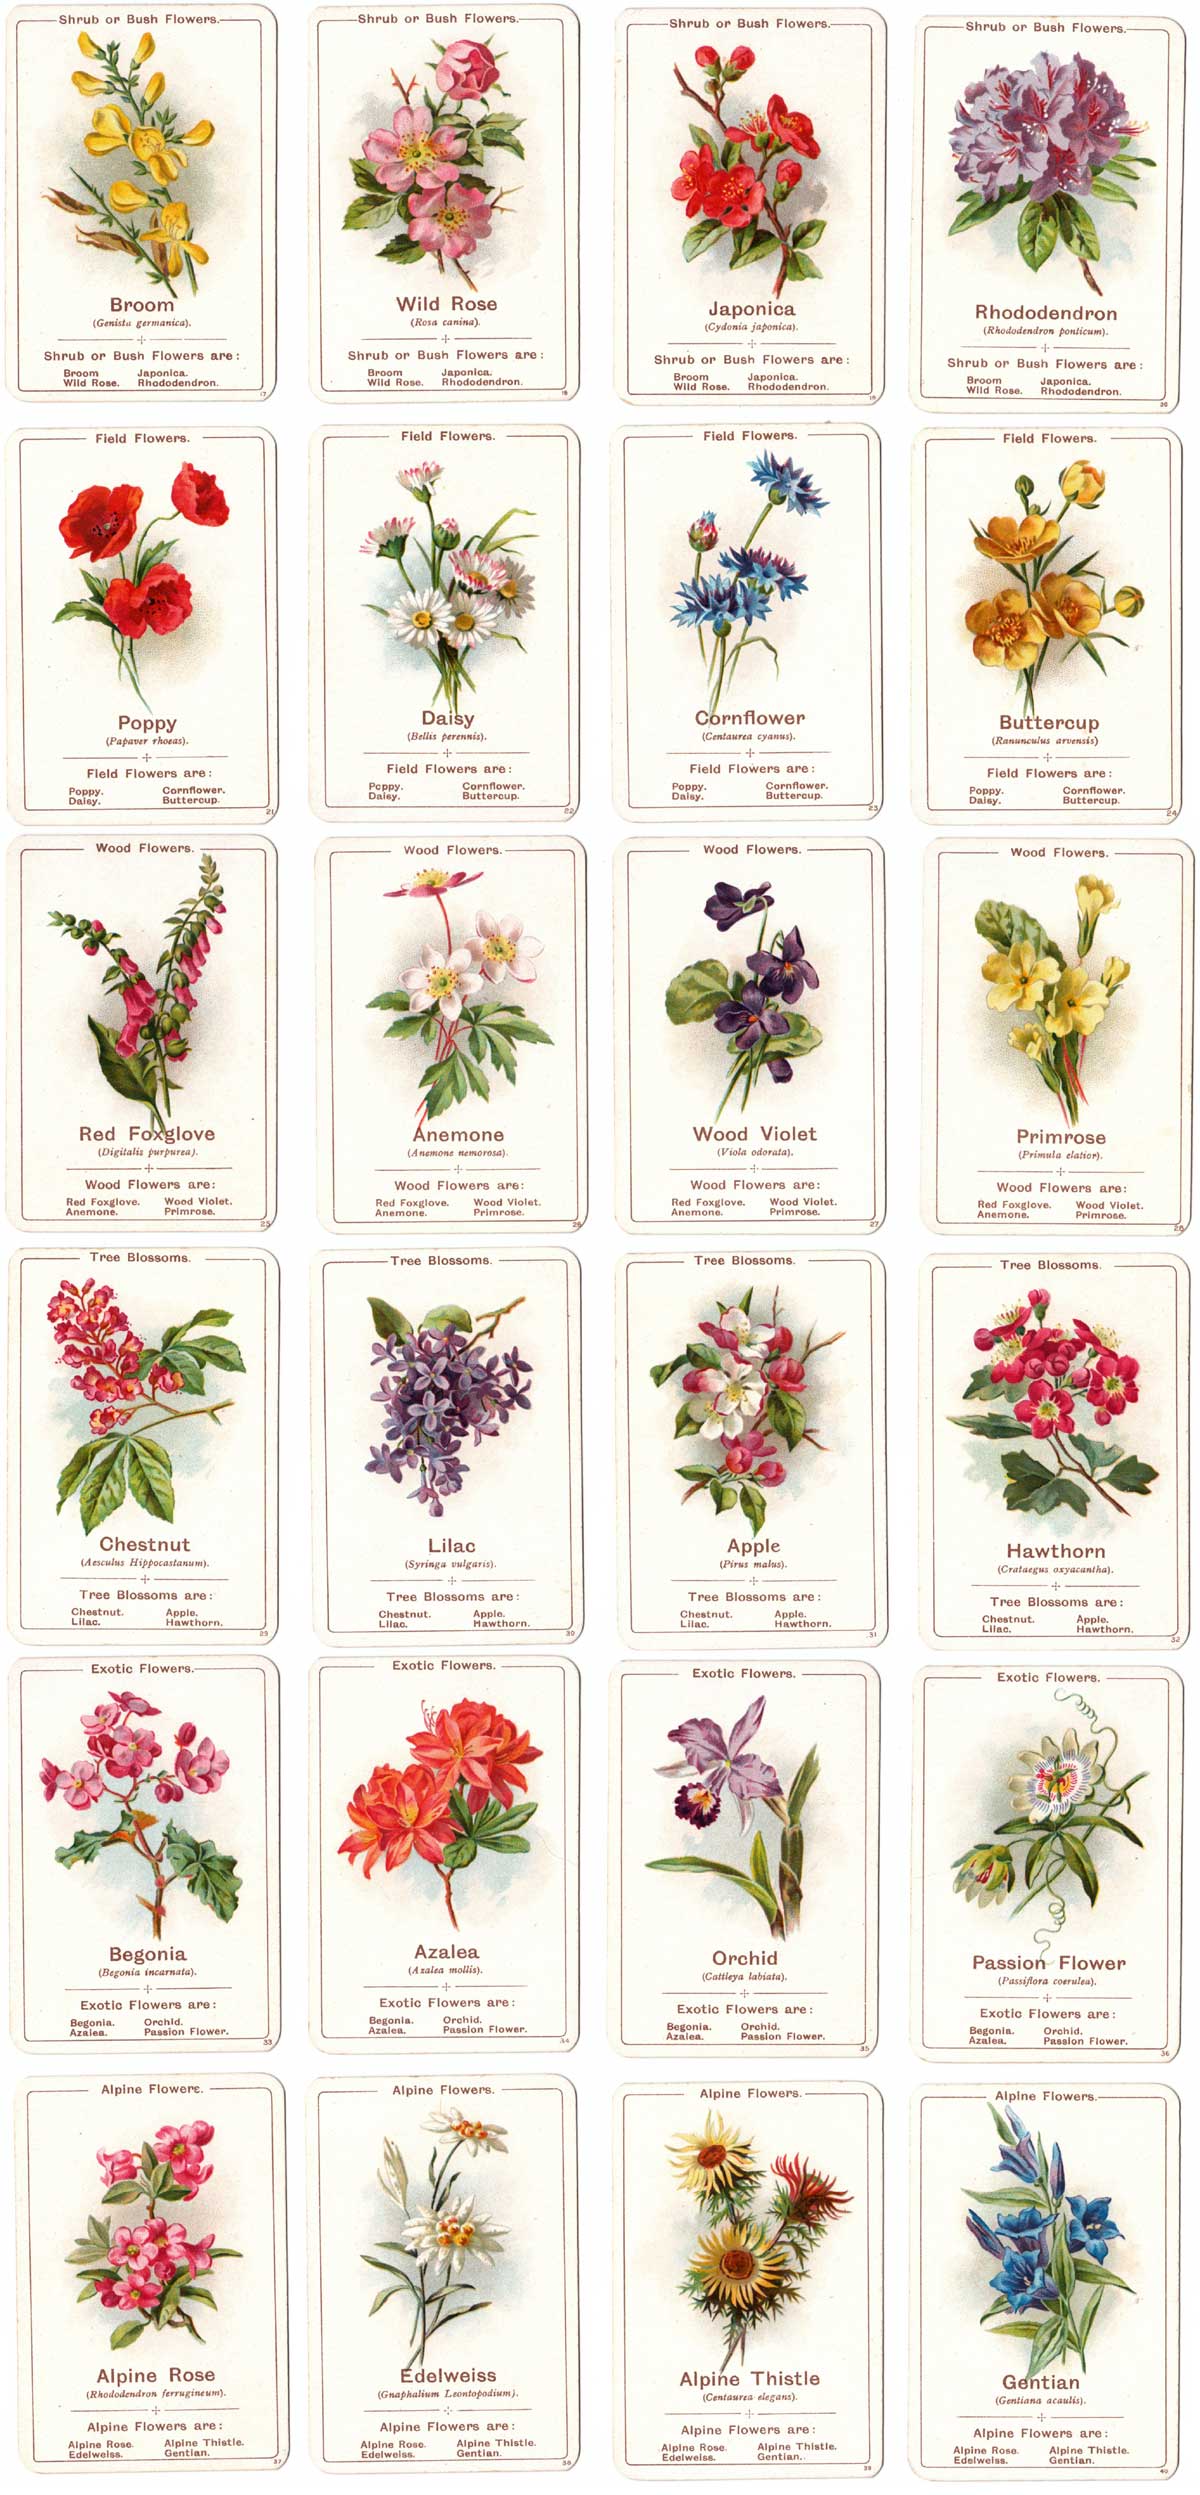 ‘Flora’ card game published by C.W. Faulkner, printed by Dondorf, 1903